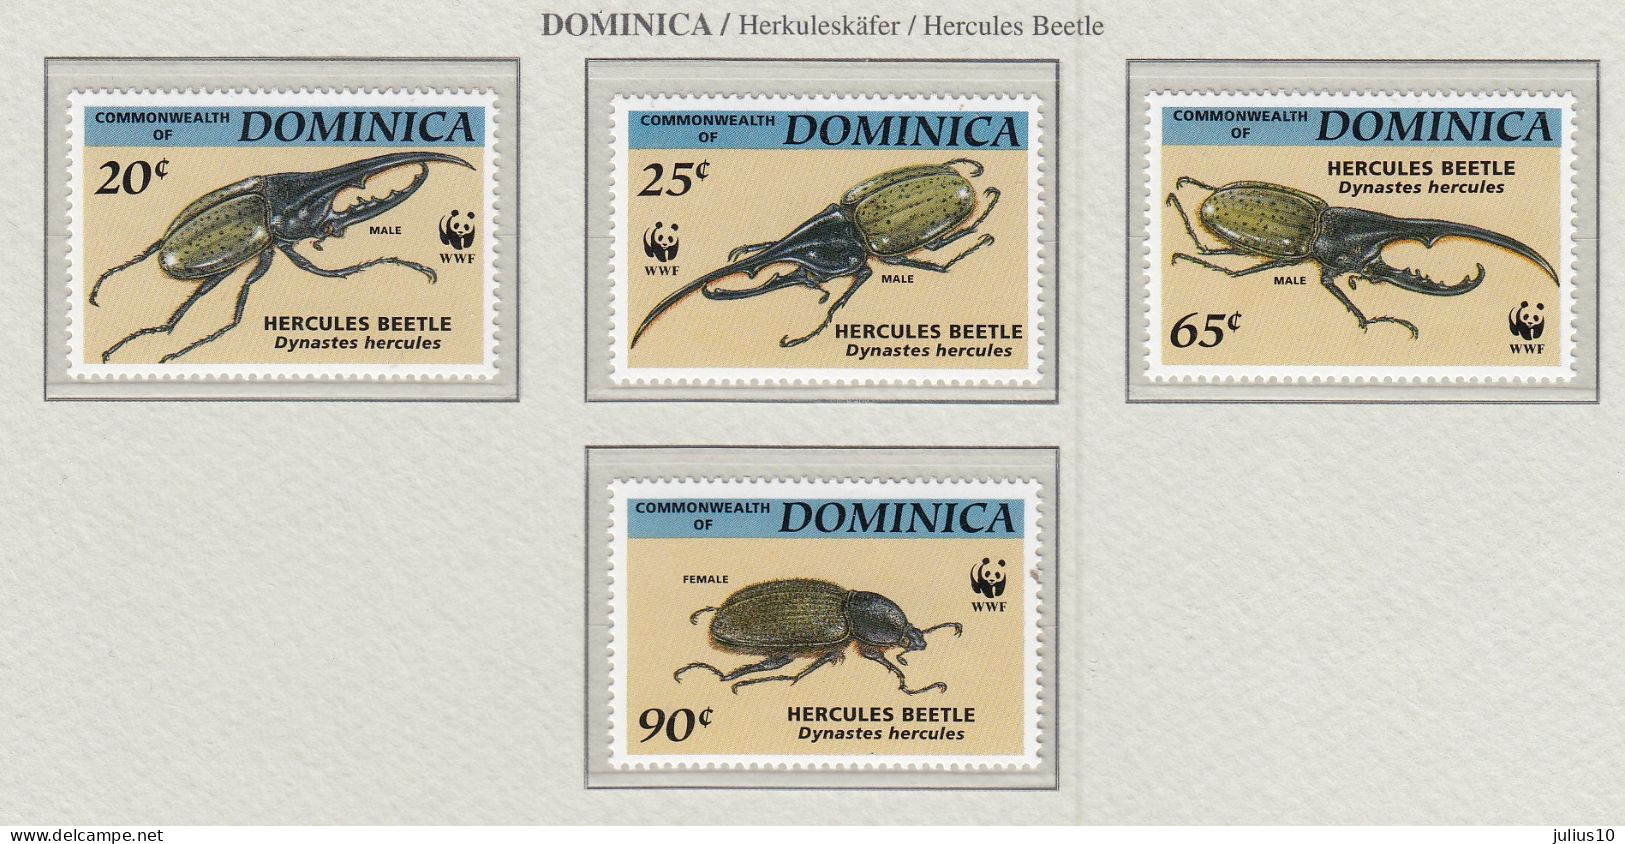 DOMINICA 1994 WWF Insects Beetles Mi 1804-1807 MNH(**) Fauna 510 - Coléoptères